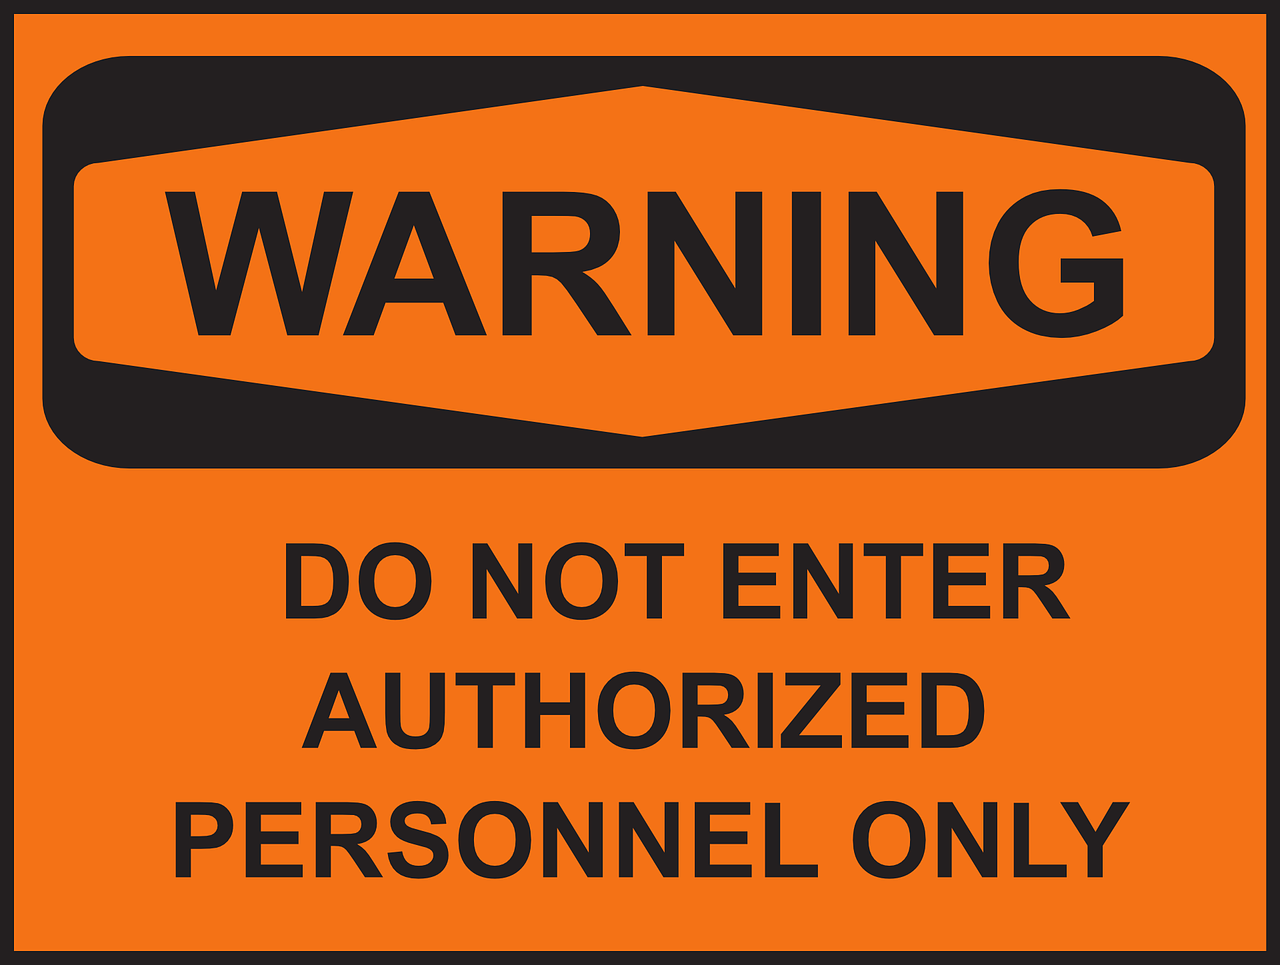 Warning sign letting you know that only authorized personnel are allowed to enter